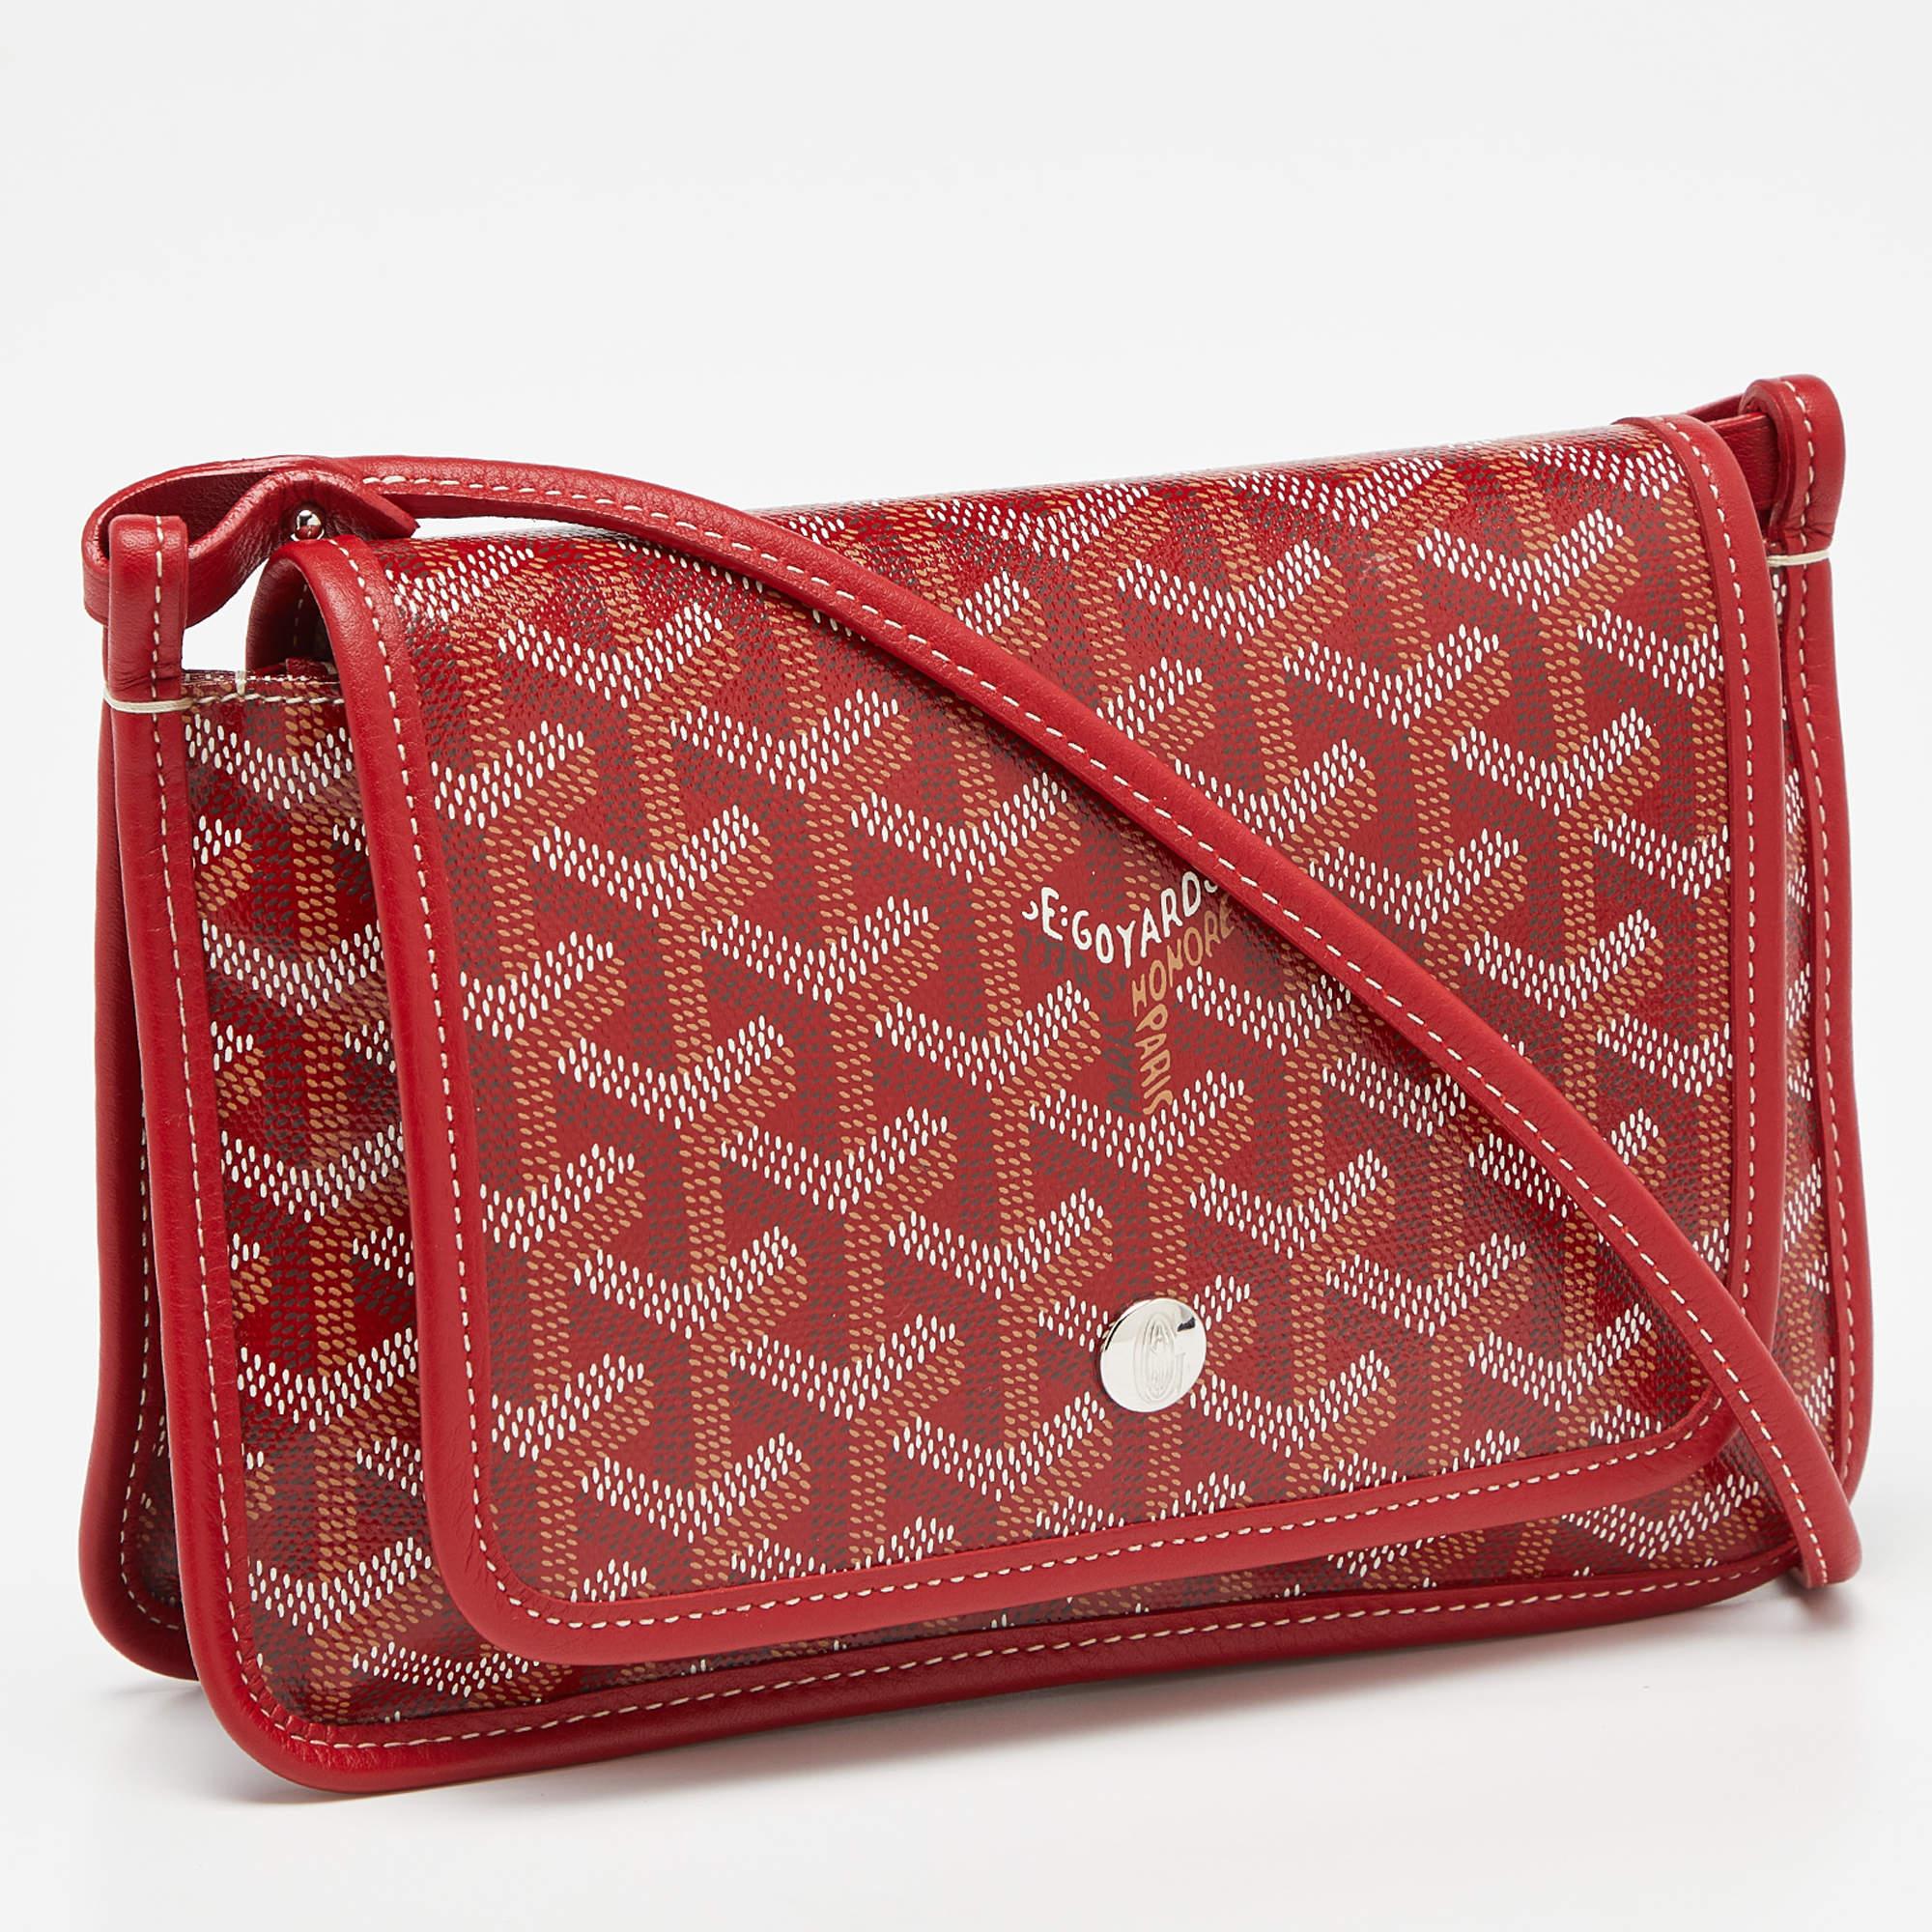 Ensure your day's essentials are in order and your outfit is complete with this authentic Goyard bag for women. Crafted using Goyardine canvas, the bag has a long strap, flap closure, and a well-sized interior lined with canvas.

